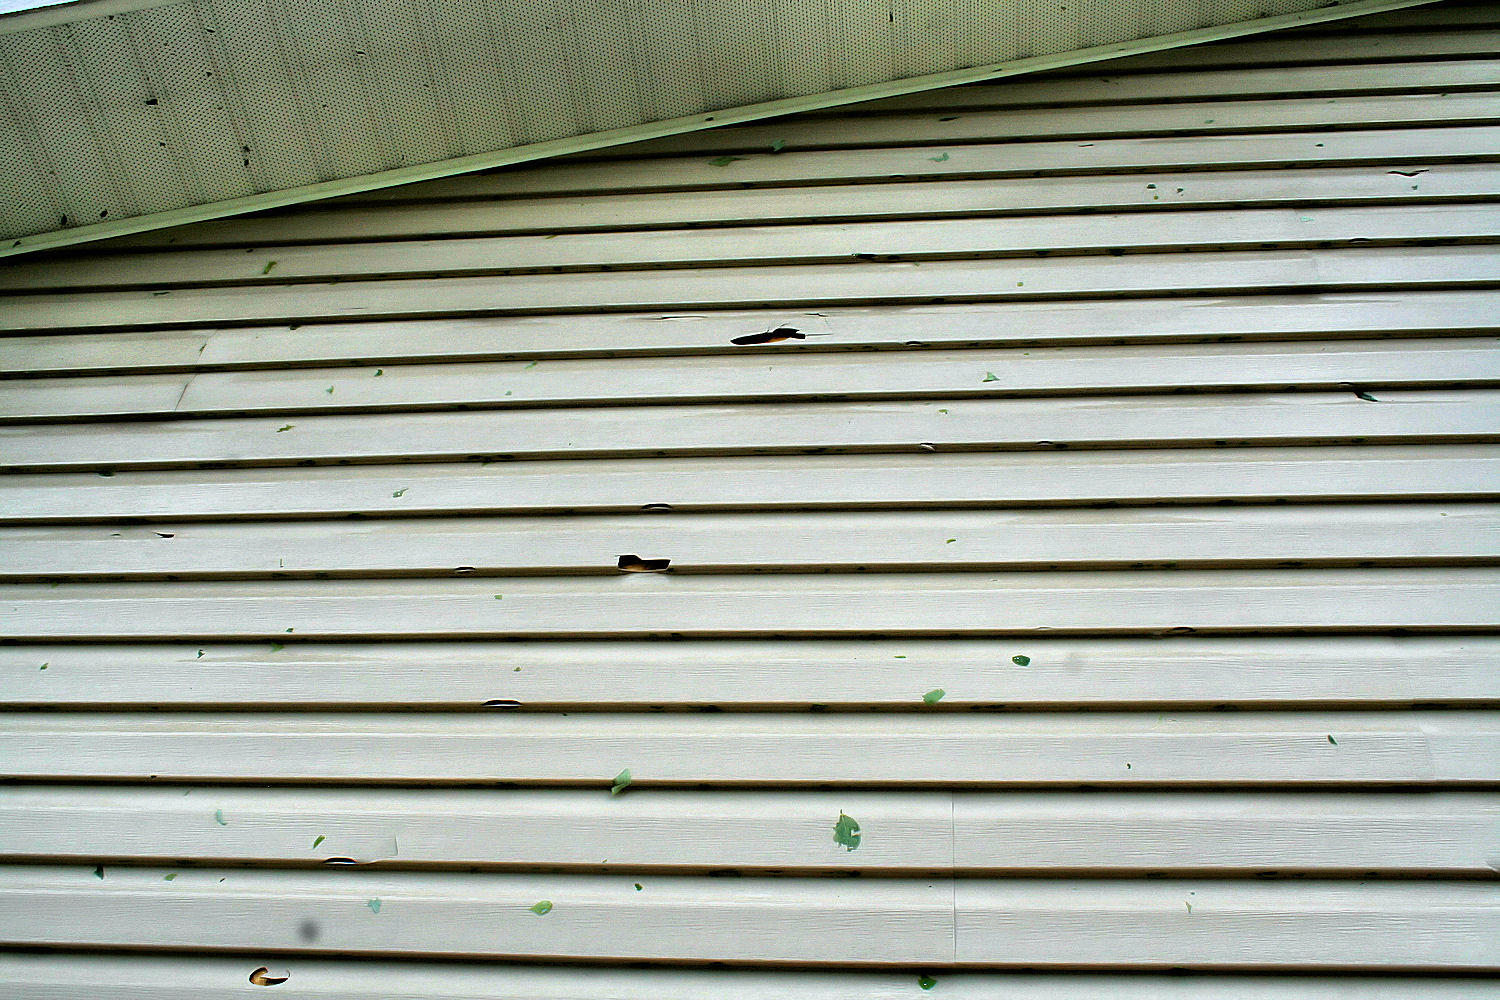 Damage to The House From The Hail